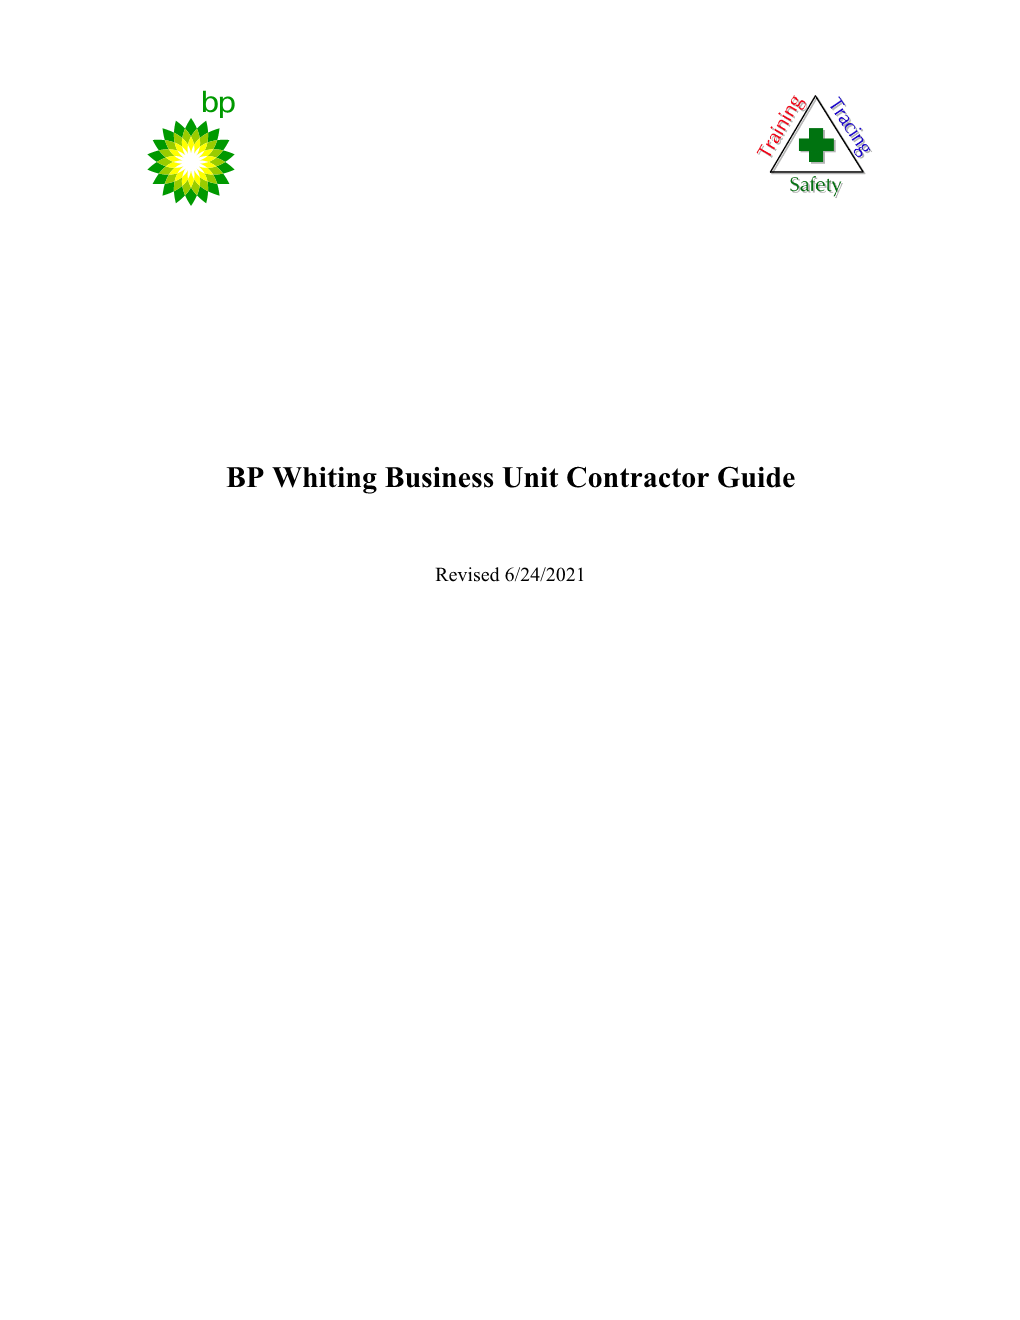 BP Whiting Business Unit Contractor Guide